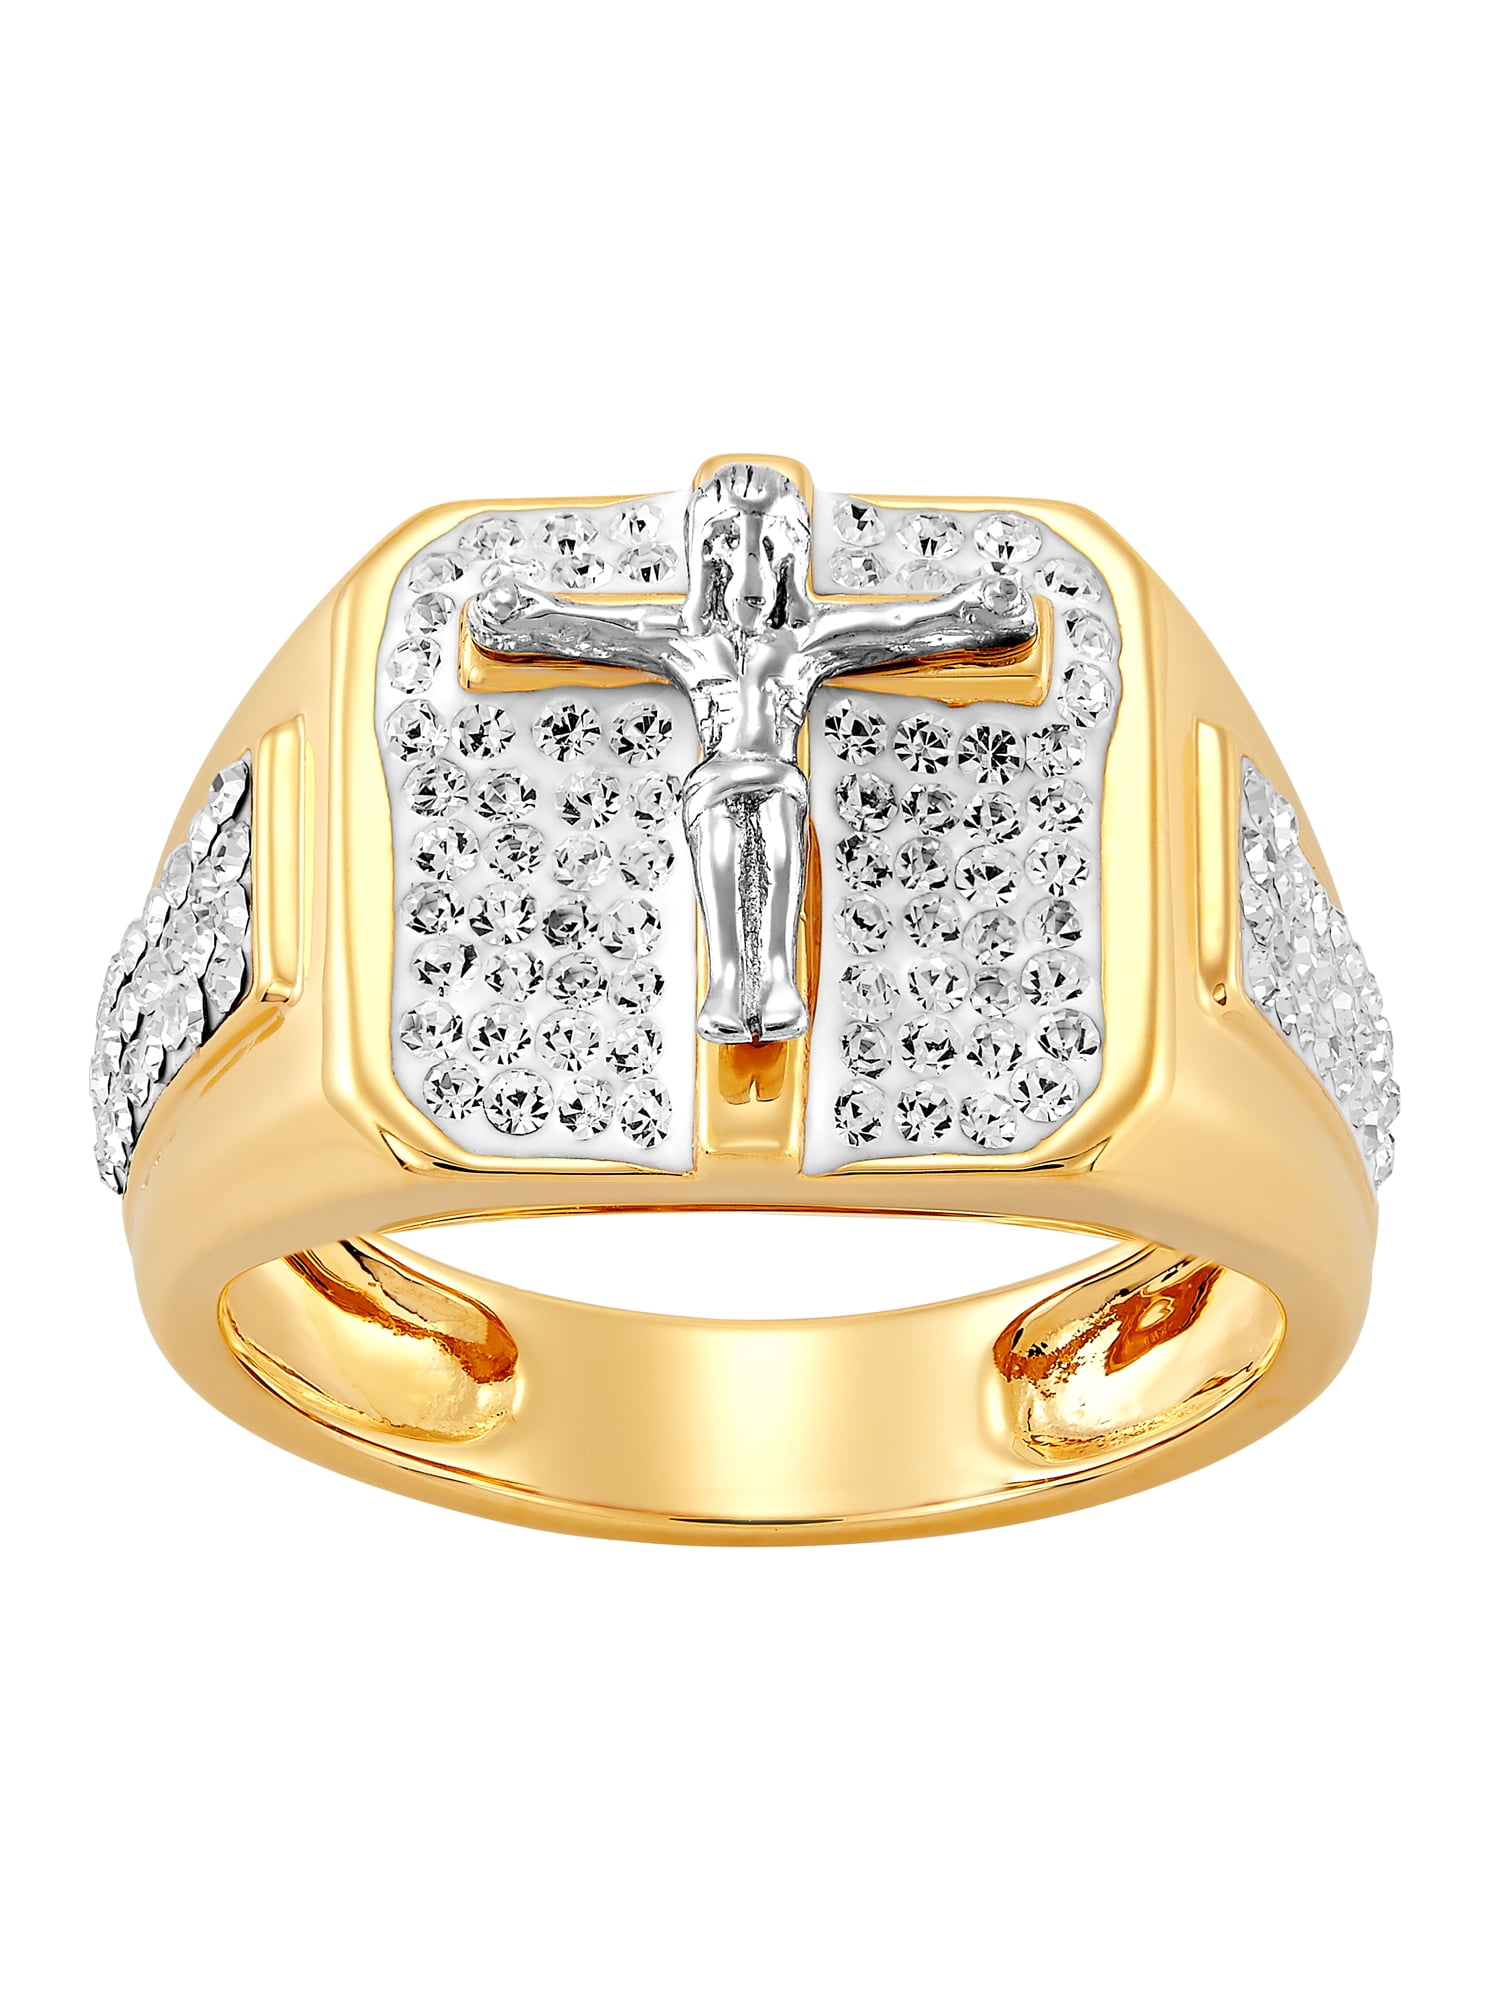 Celebration Moments 14K Gold Over Sterling Silver 925 Double Sideways Cross Cubic Zirconia Ring Sizes 5-11